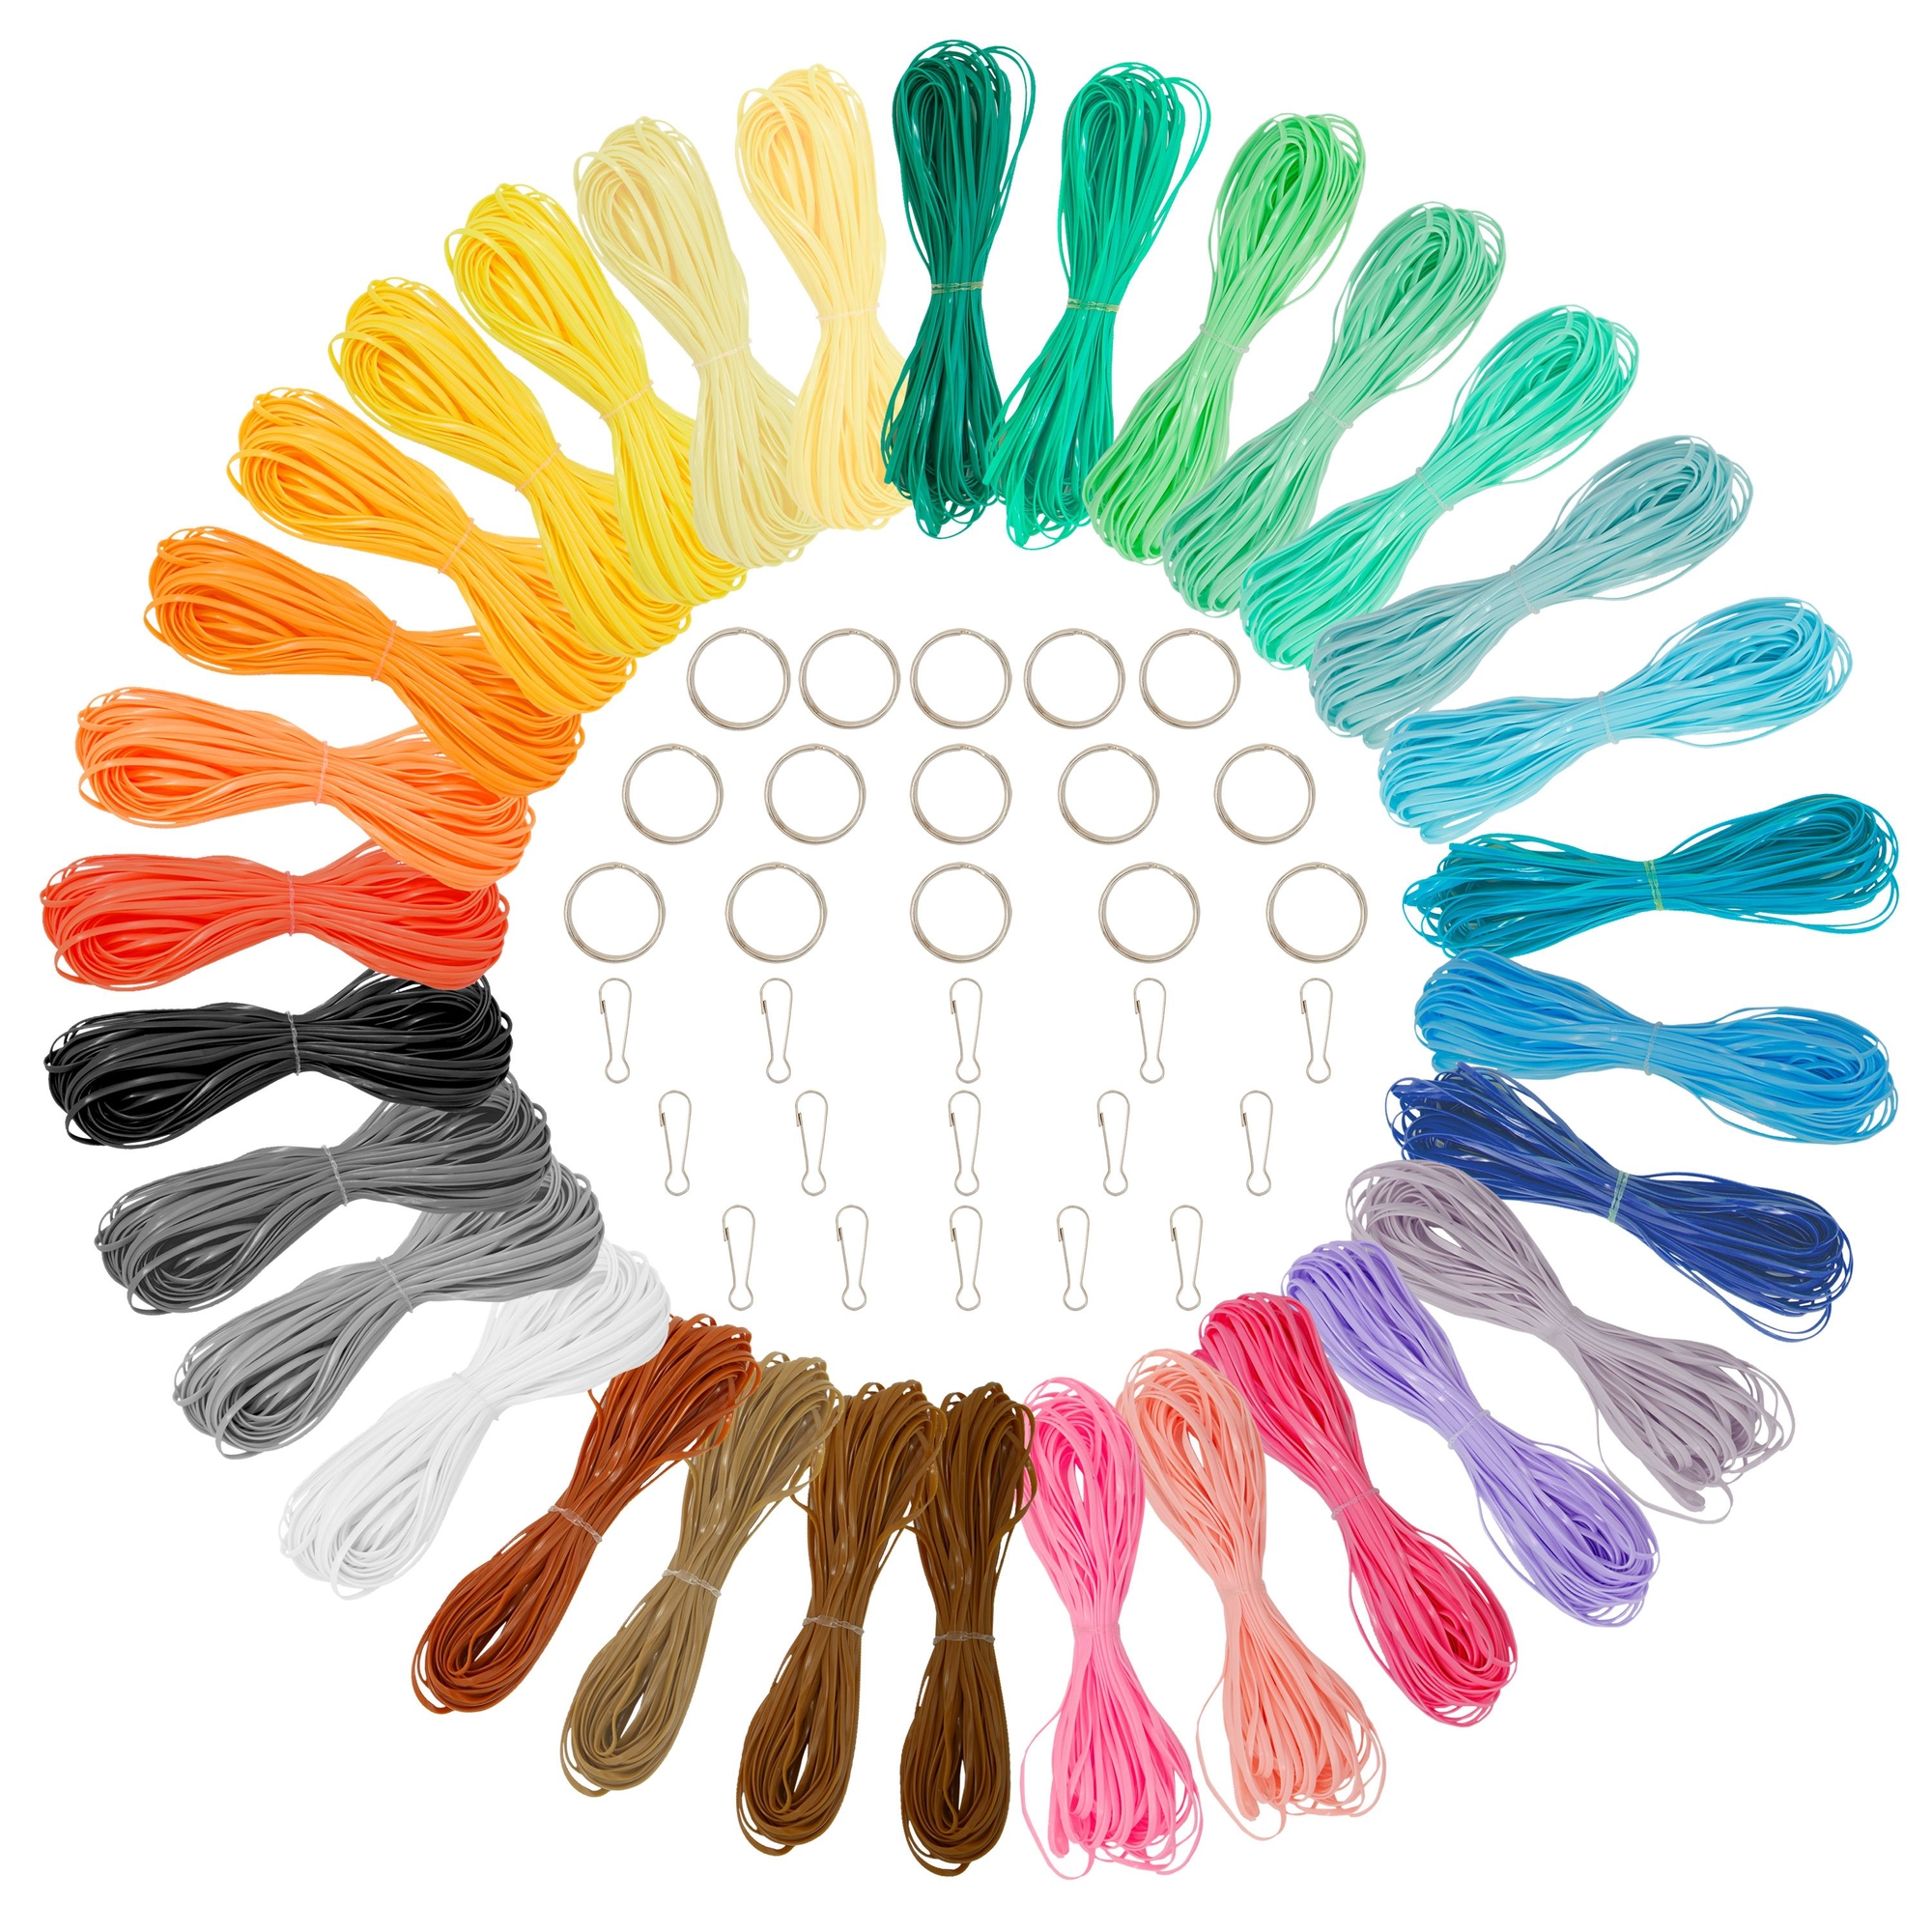 31 Color Lanyard String Kit, Gimp String for Bracelets Boondoggle  Keychains, Plastic Cord with Rings and Hooks (40 Ft Each Roll)